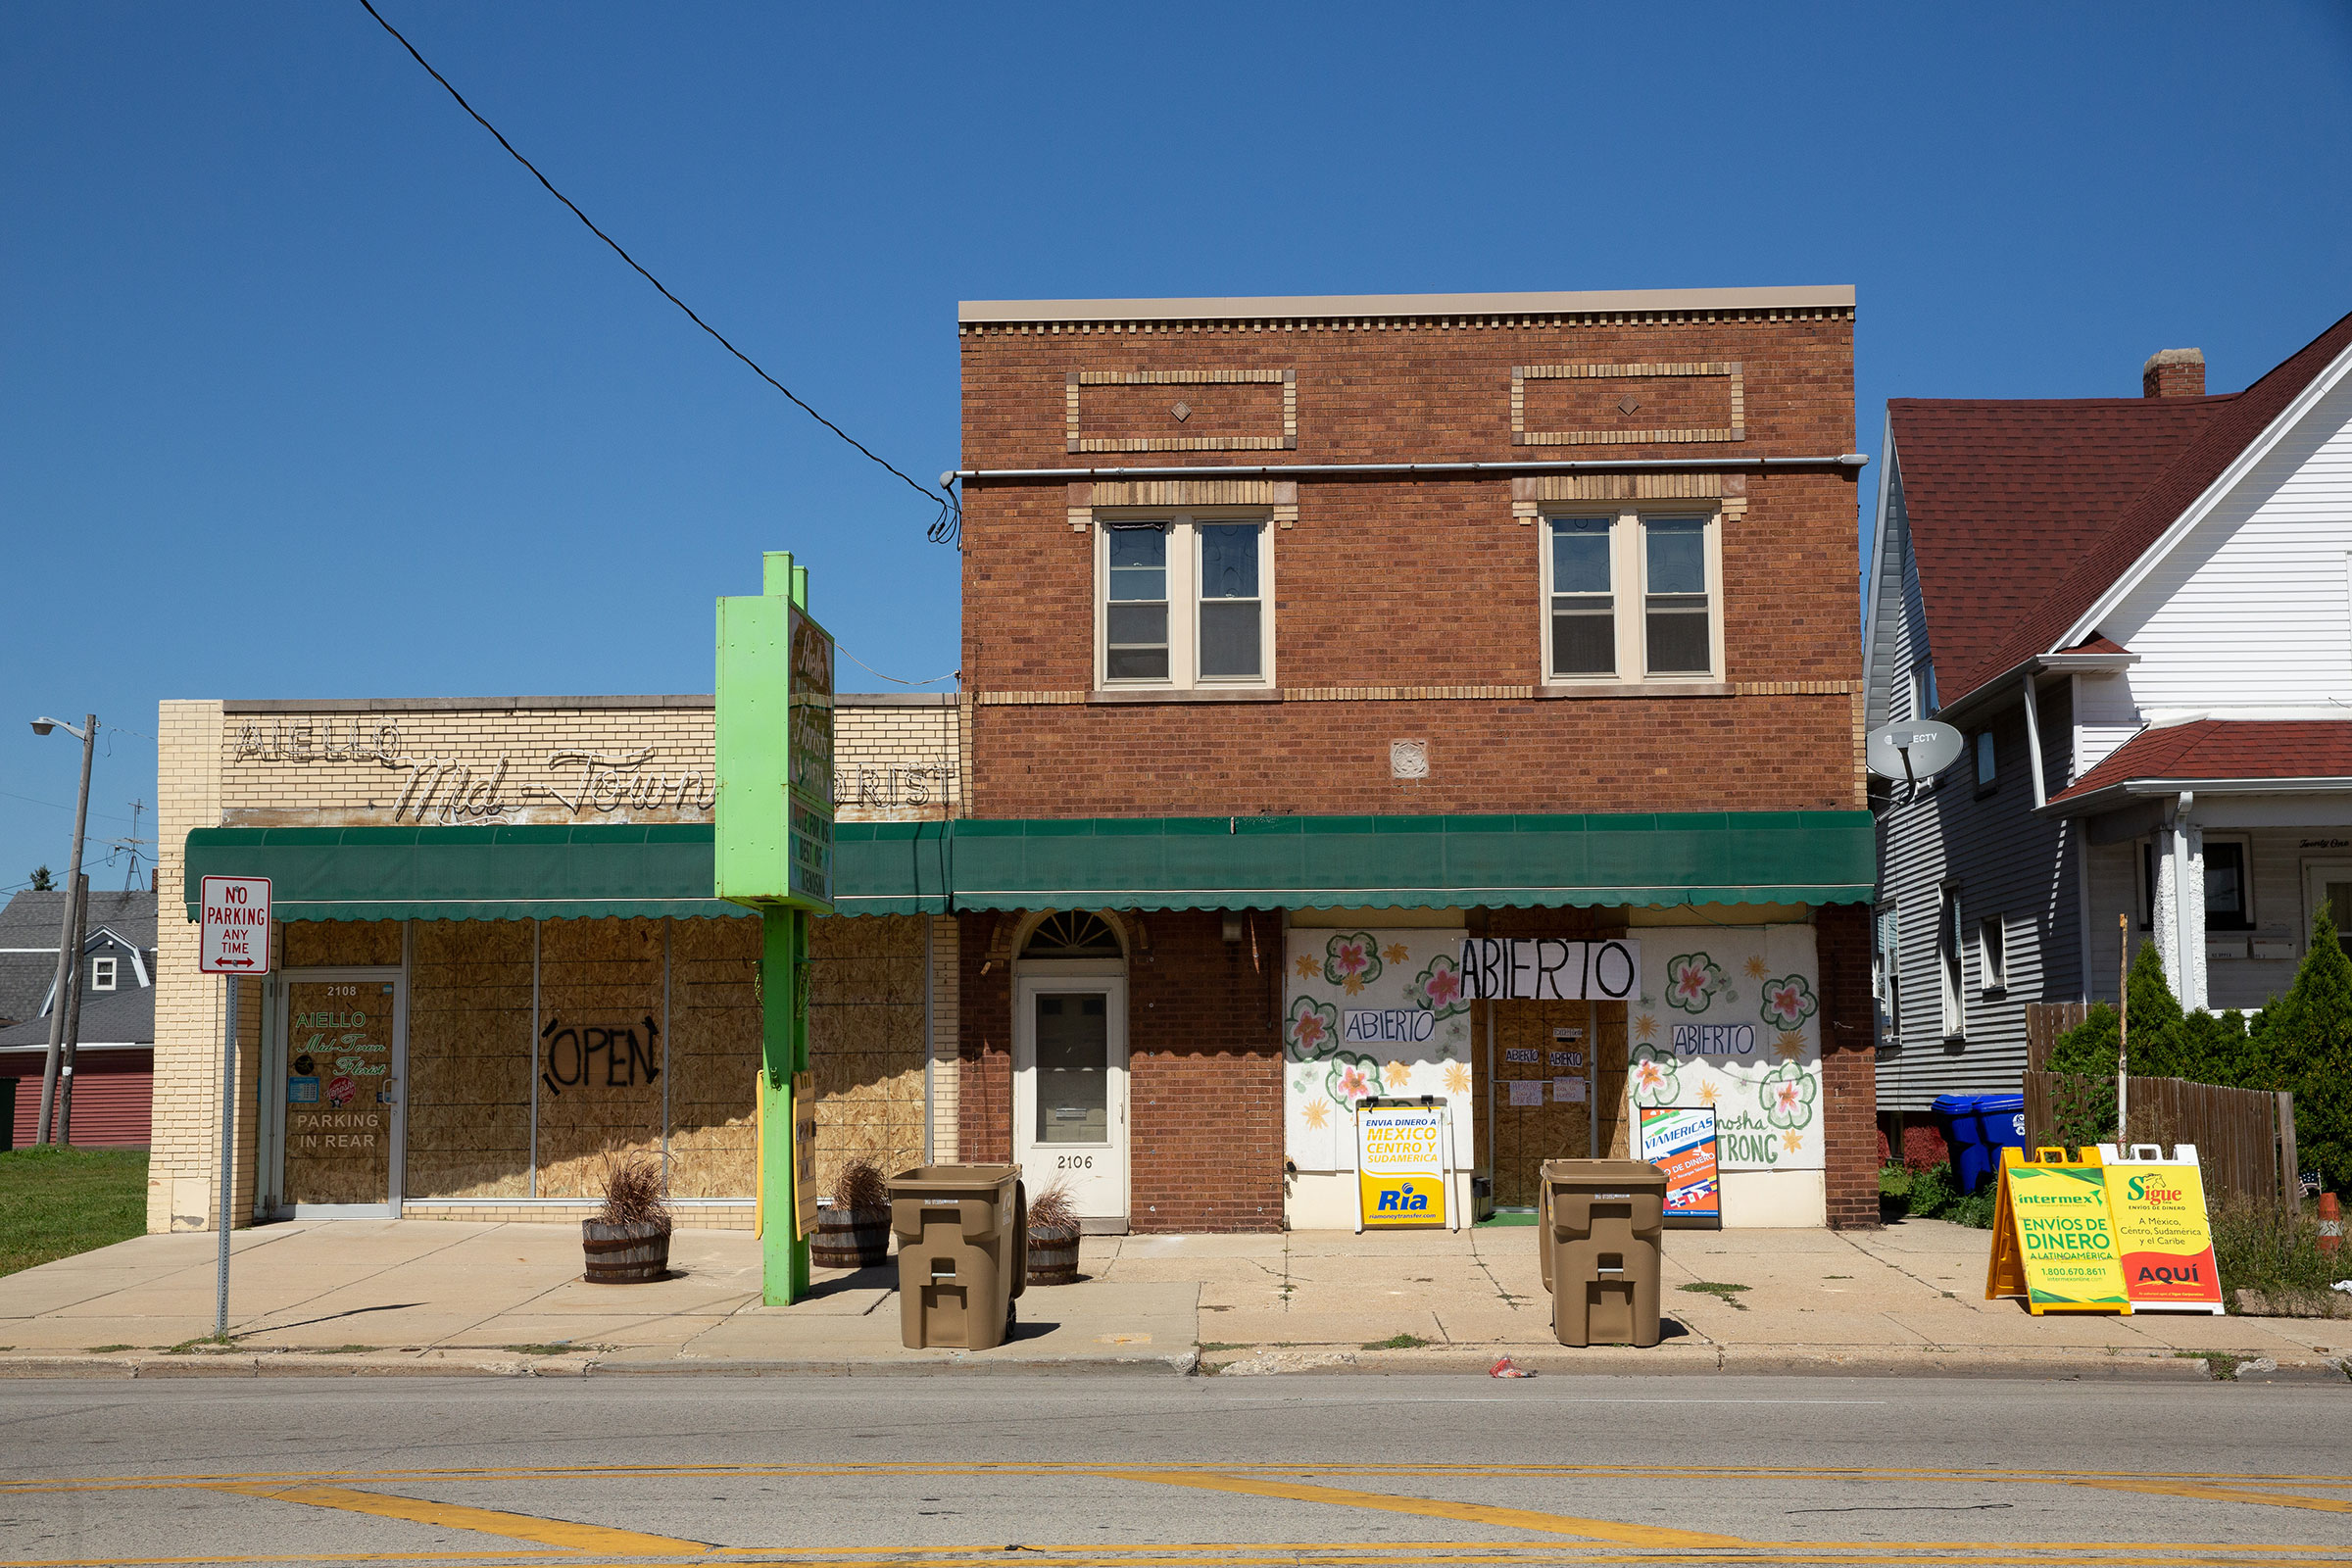 Boarded-up windows on businesses let patrons know they are still open in Kenosha, Wis., on Sept. 2, 2020. (Patience Zalanga for TIME)